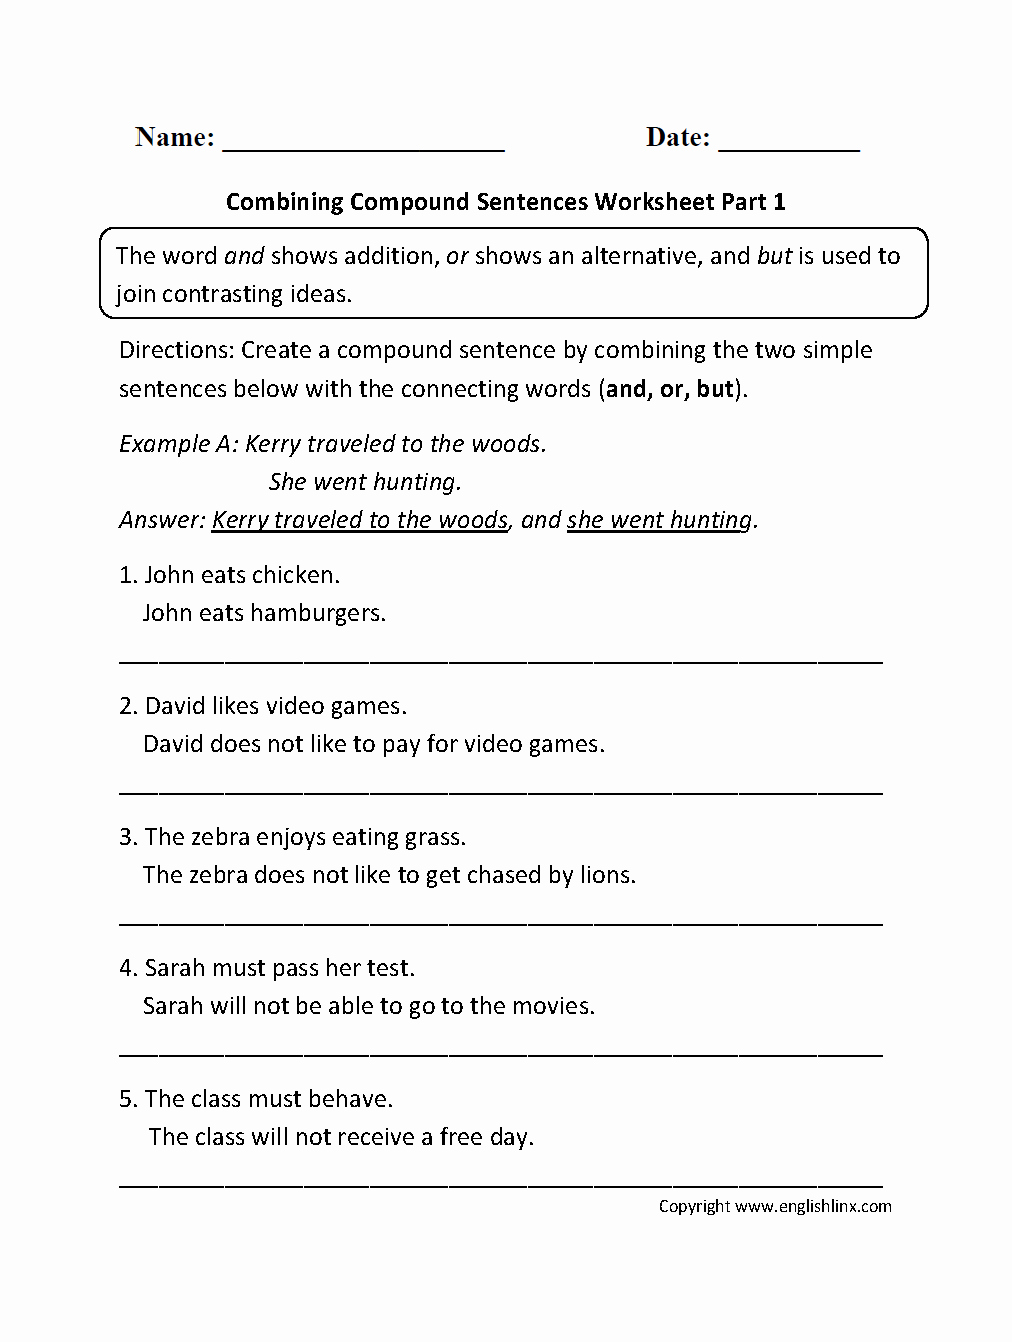 Complex Sentence Worksheets 4th Grade Lovely Bining Sentences 4th Grade Worksheets